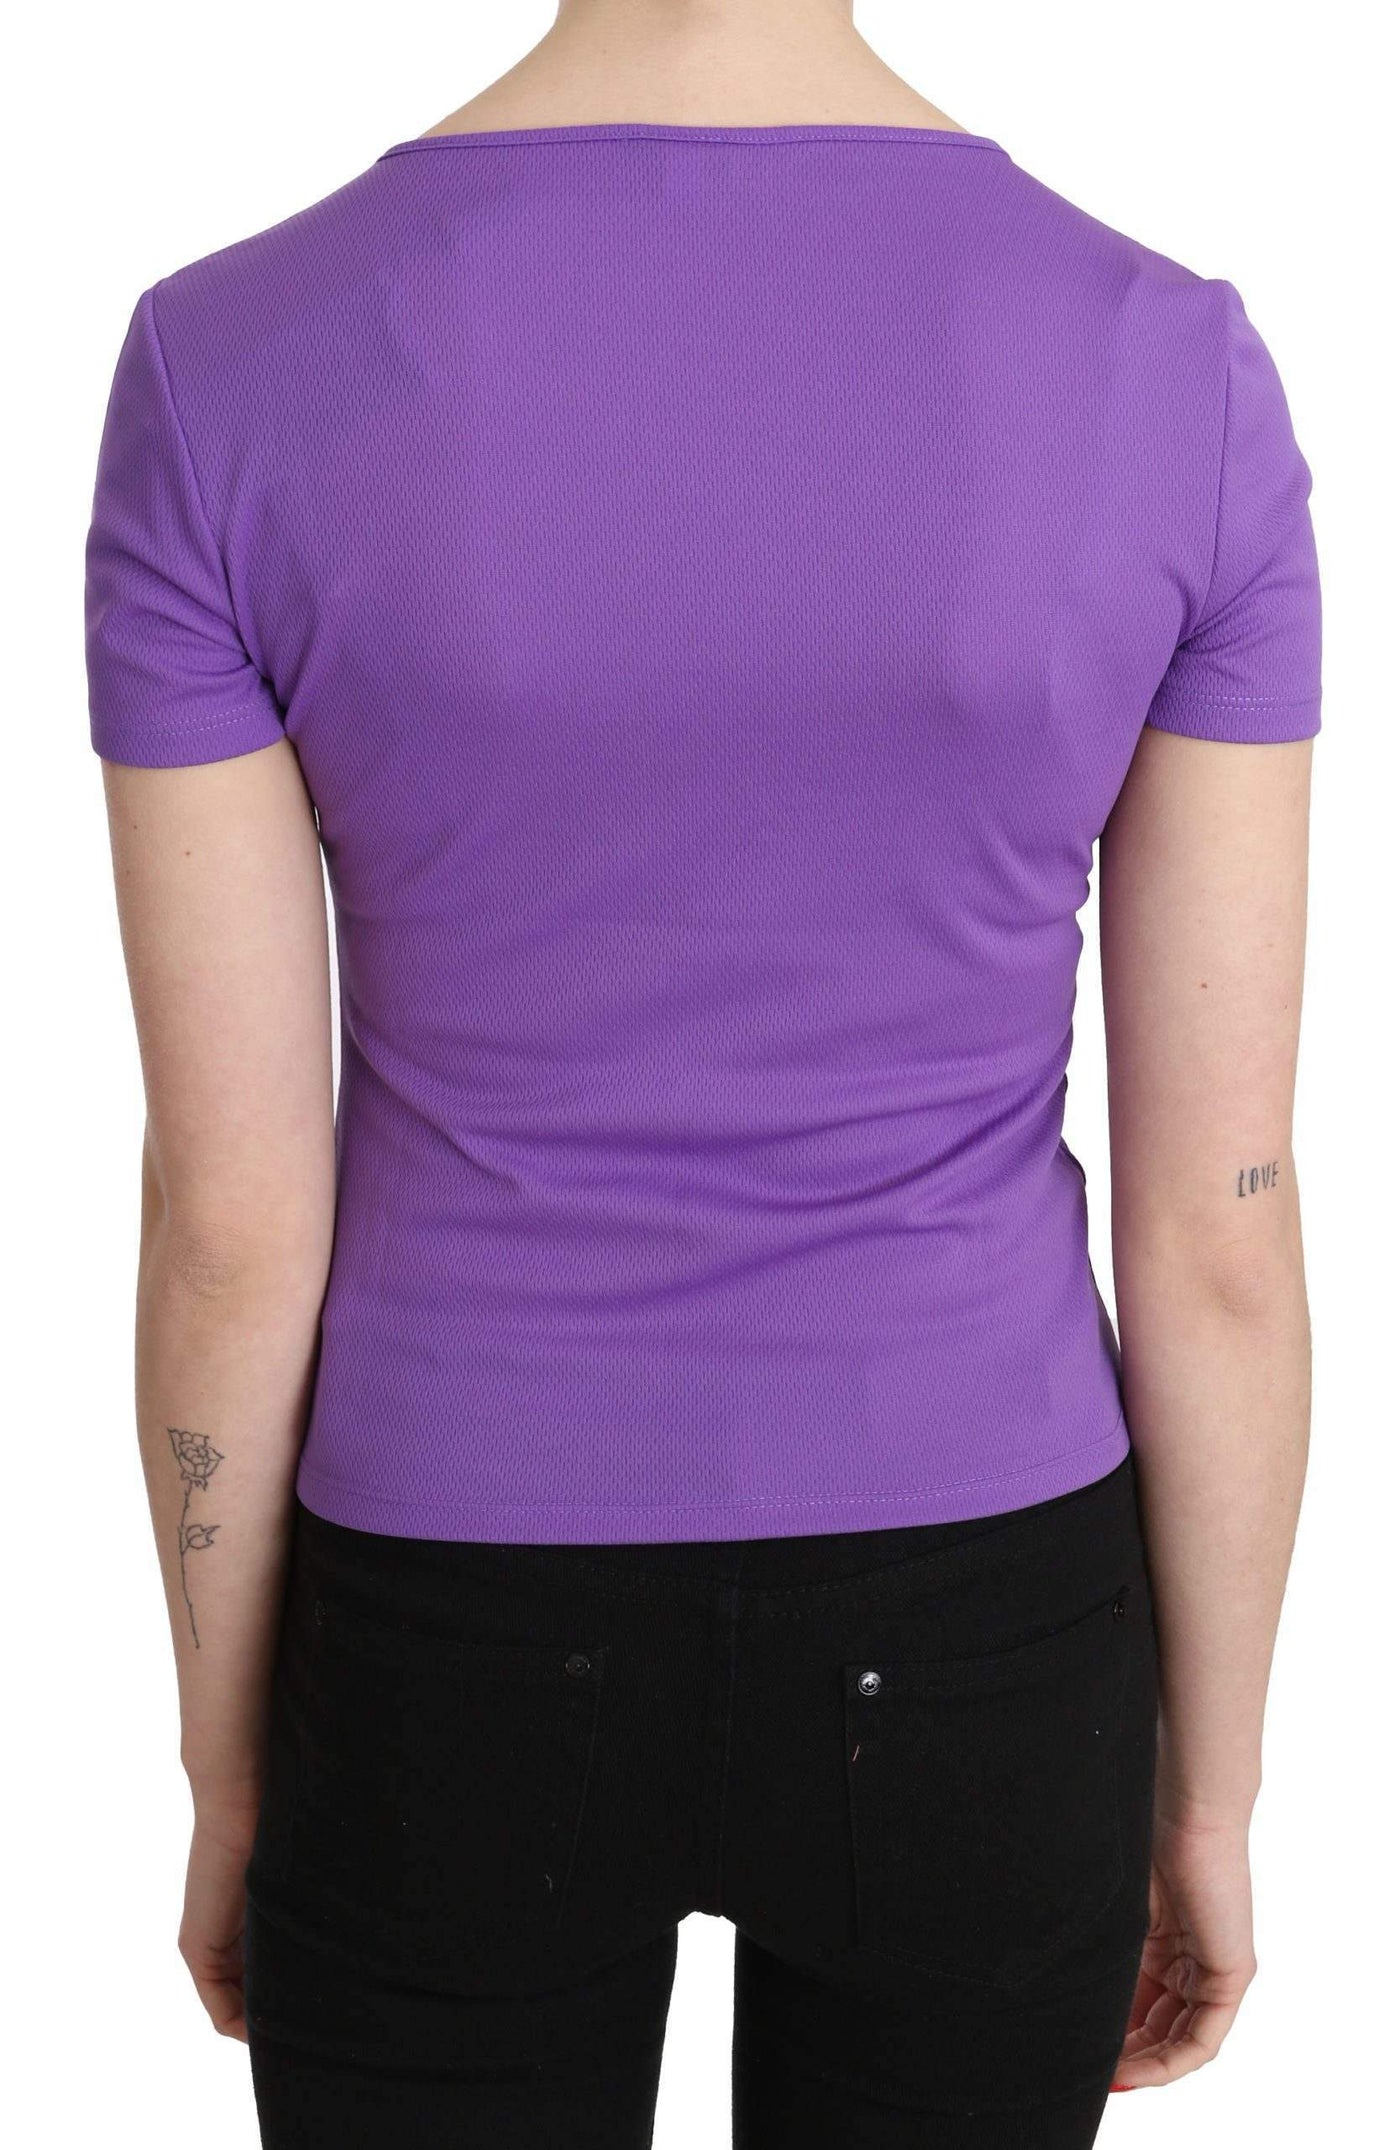 GF Ferre Purple  Polyester Short Sleeve Top  Blouse #women, Catch, feed-agegroup-adult, feed-color-purple, feed-gender-female, feed-size-IT40|S, Gender_Women, GF Ferre, IT40|S, Kogan, Purple, Tops & T-Shirts - Women - Clothing, Women - New Arrivals at SEYMAYKA